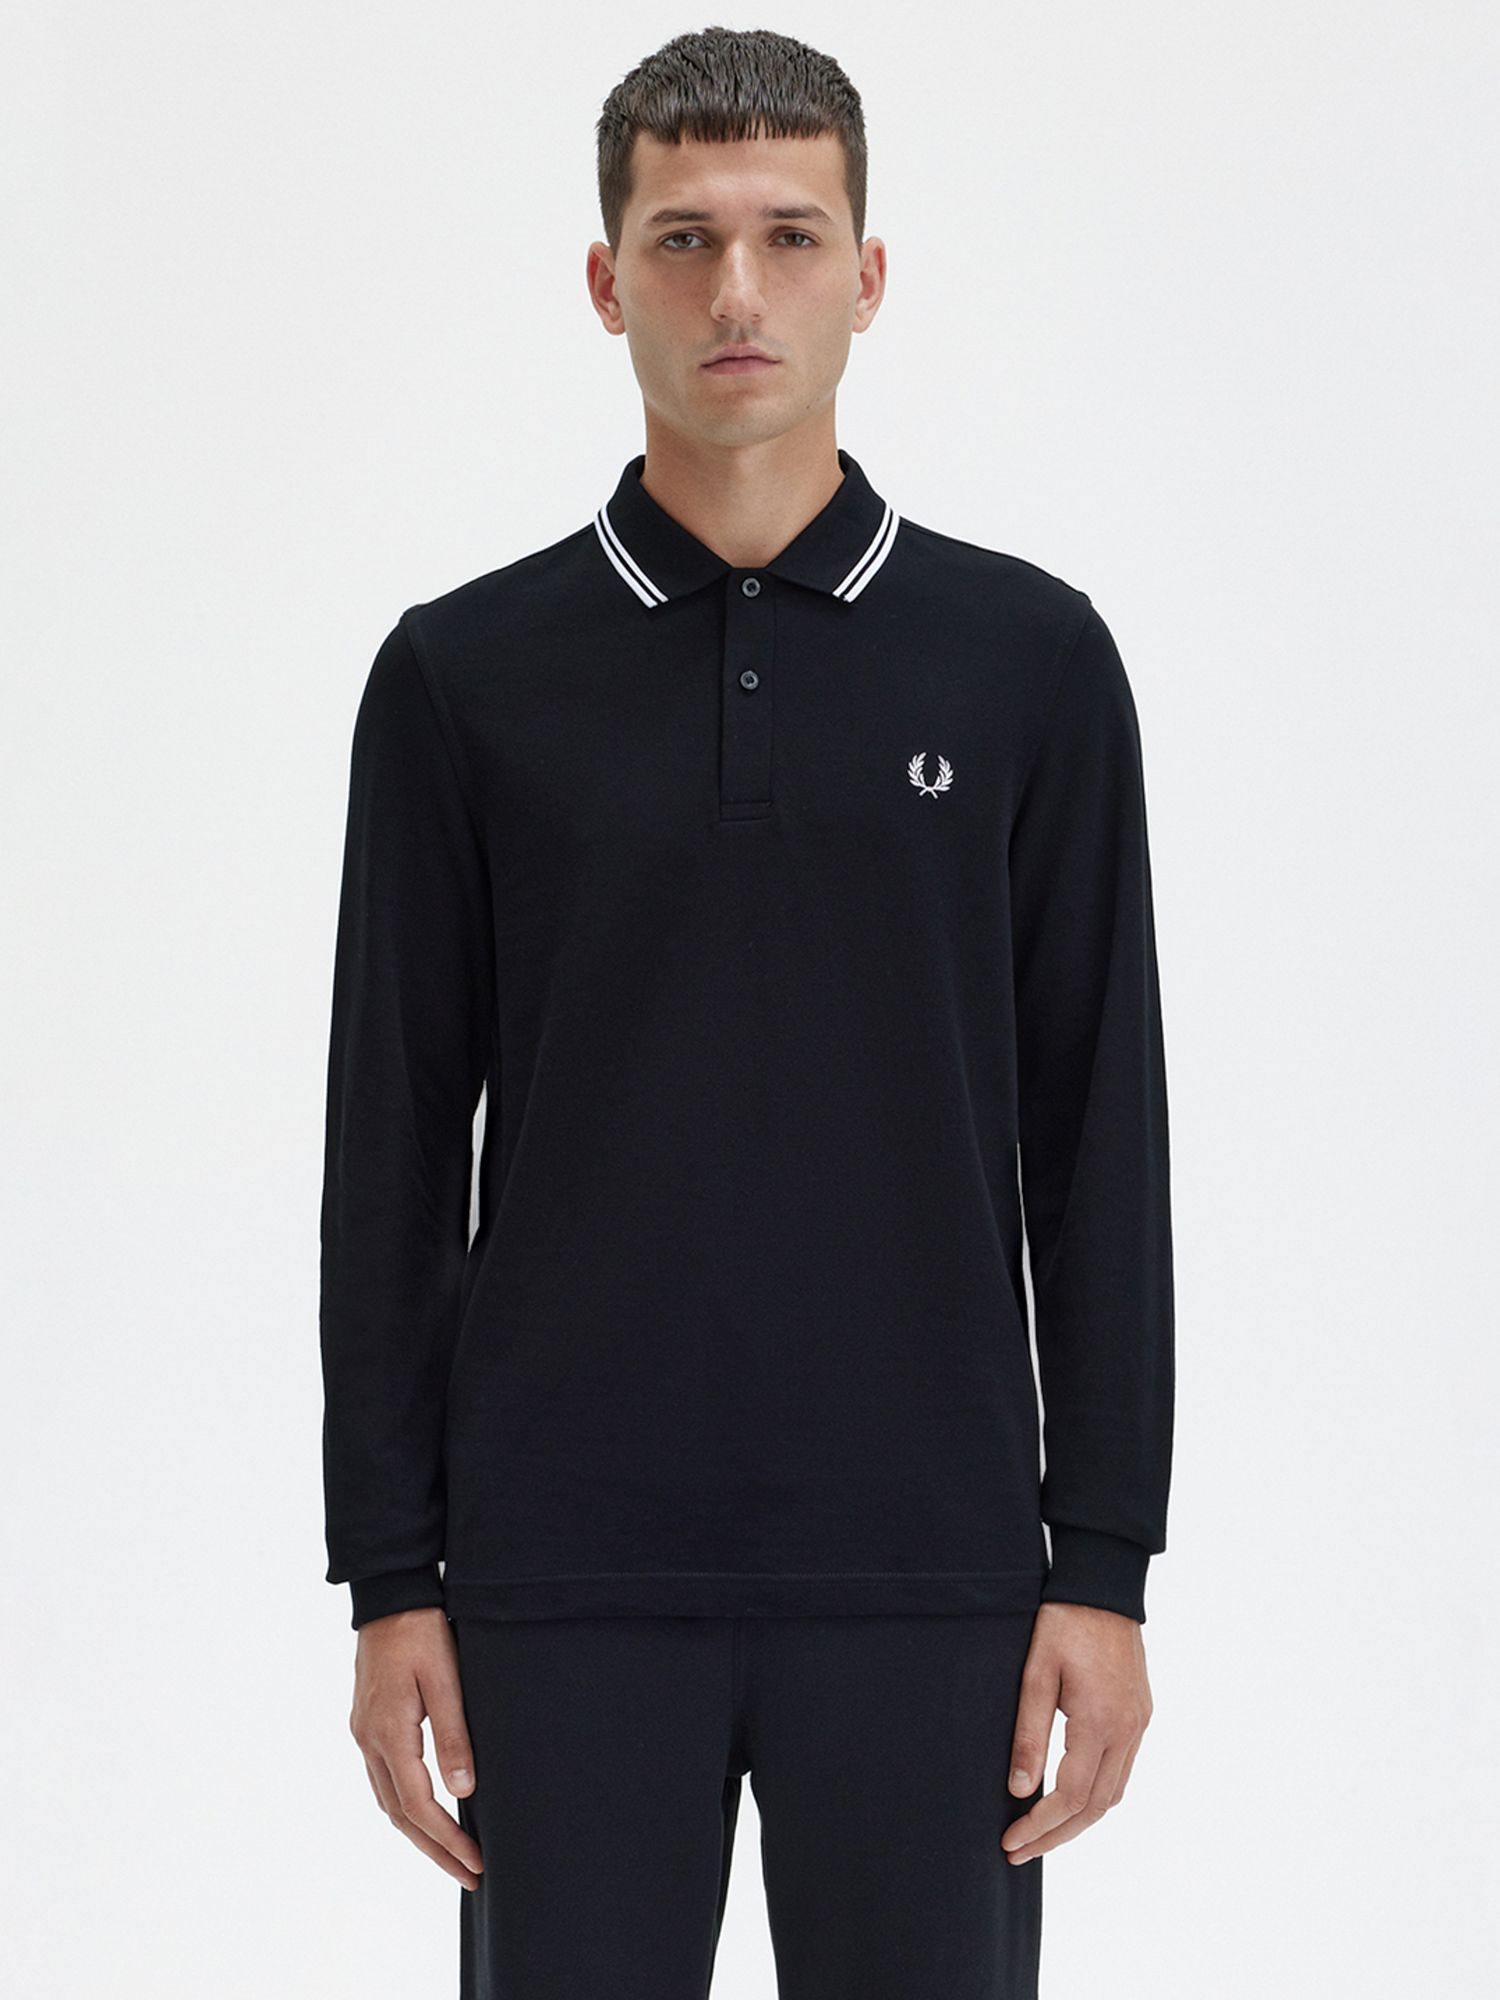 Farmacologie het internet Bron Fred Perry Twin Tipped Long Sleeve Polo Shirt, Black at John Lewis &  Partners